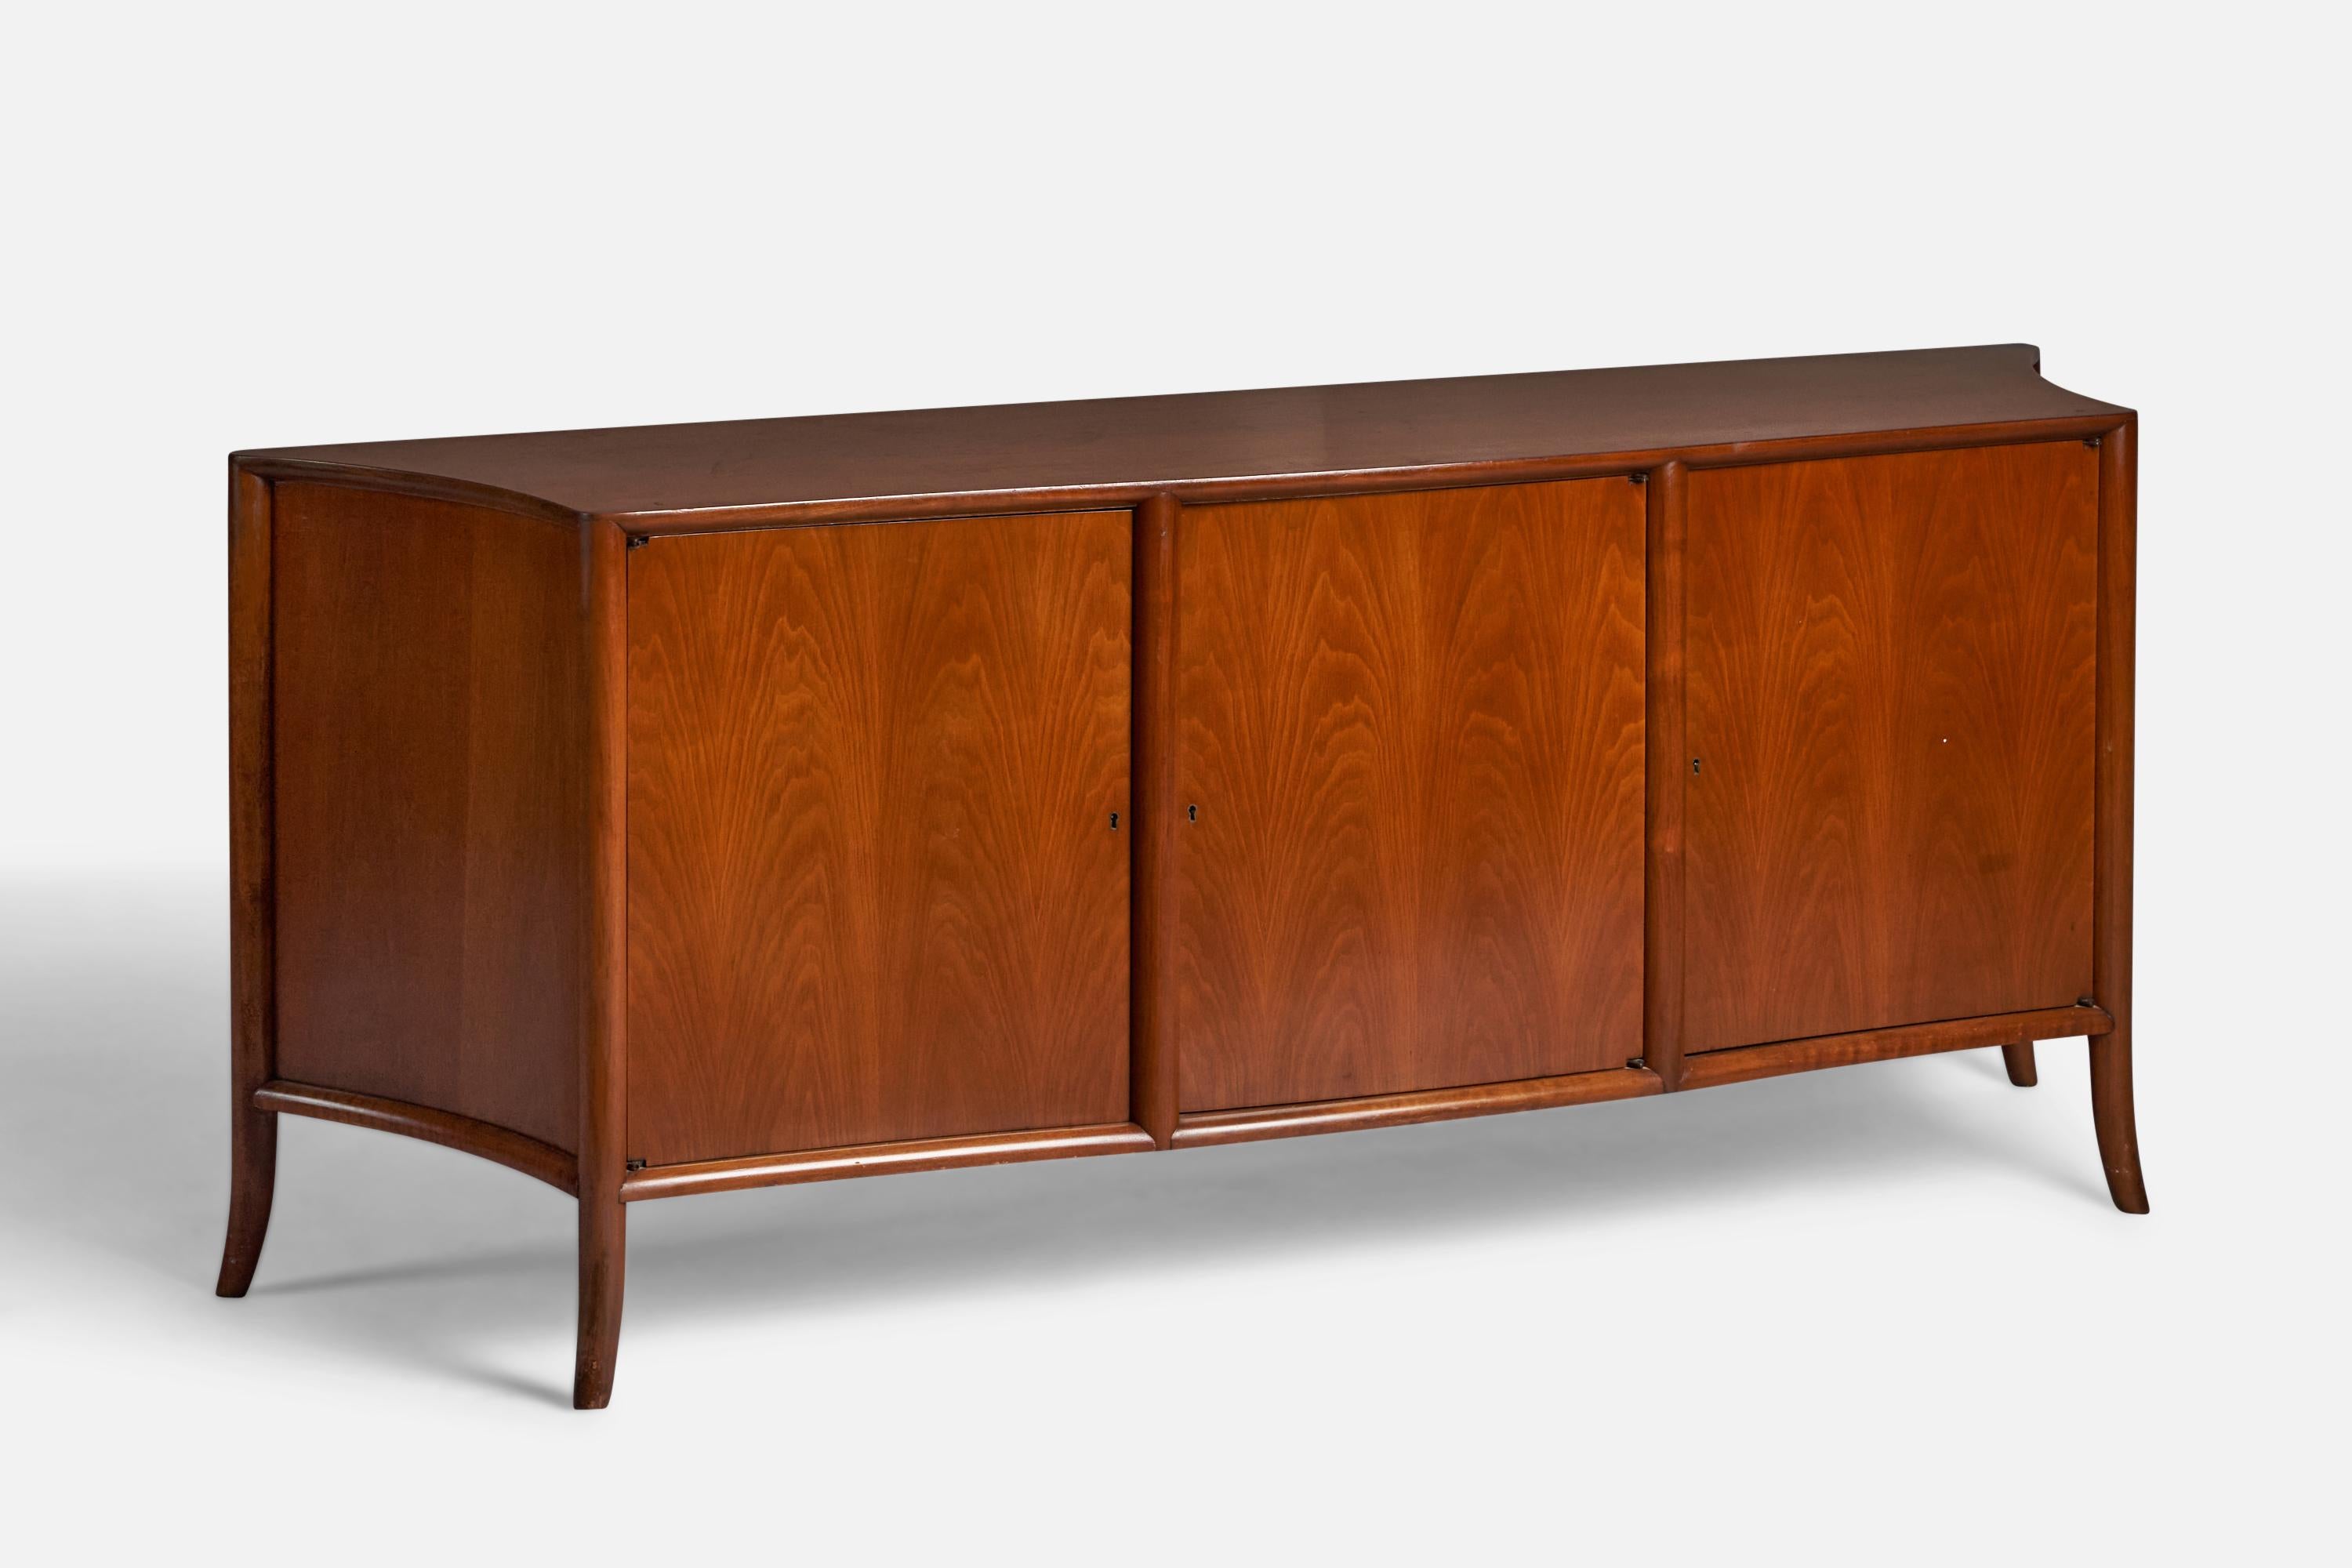 A walnut cabinet designed by T.H. Robsjohn-Gibbings and produced by Widdicomb, Grand Rapids, Michigan, USA, c. 1950s.